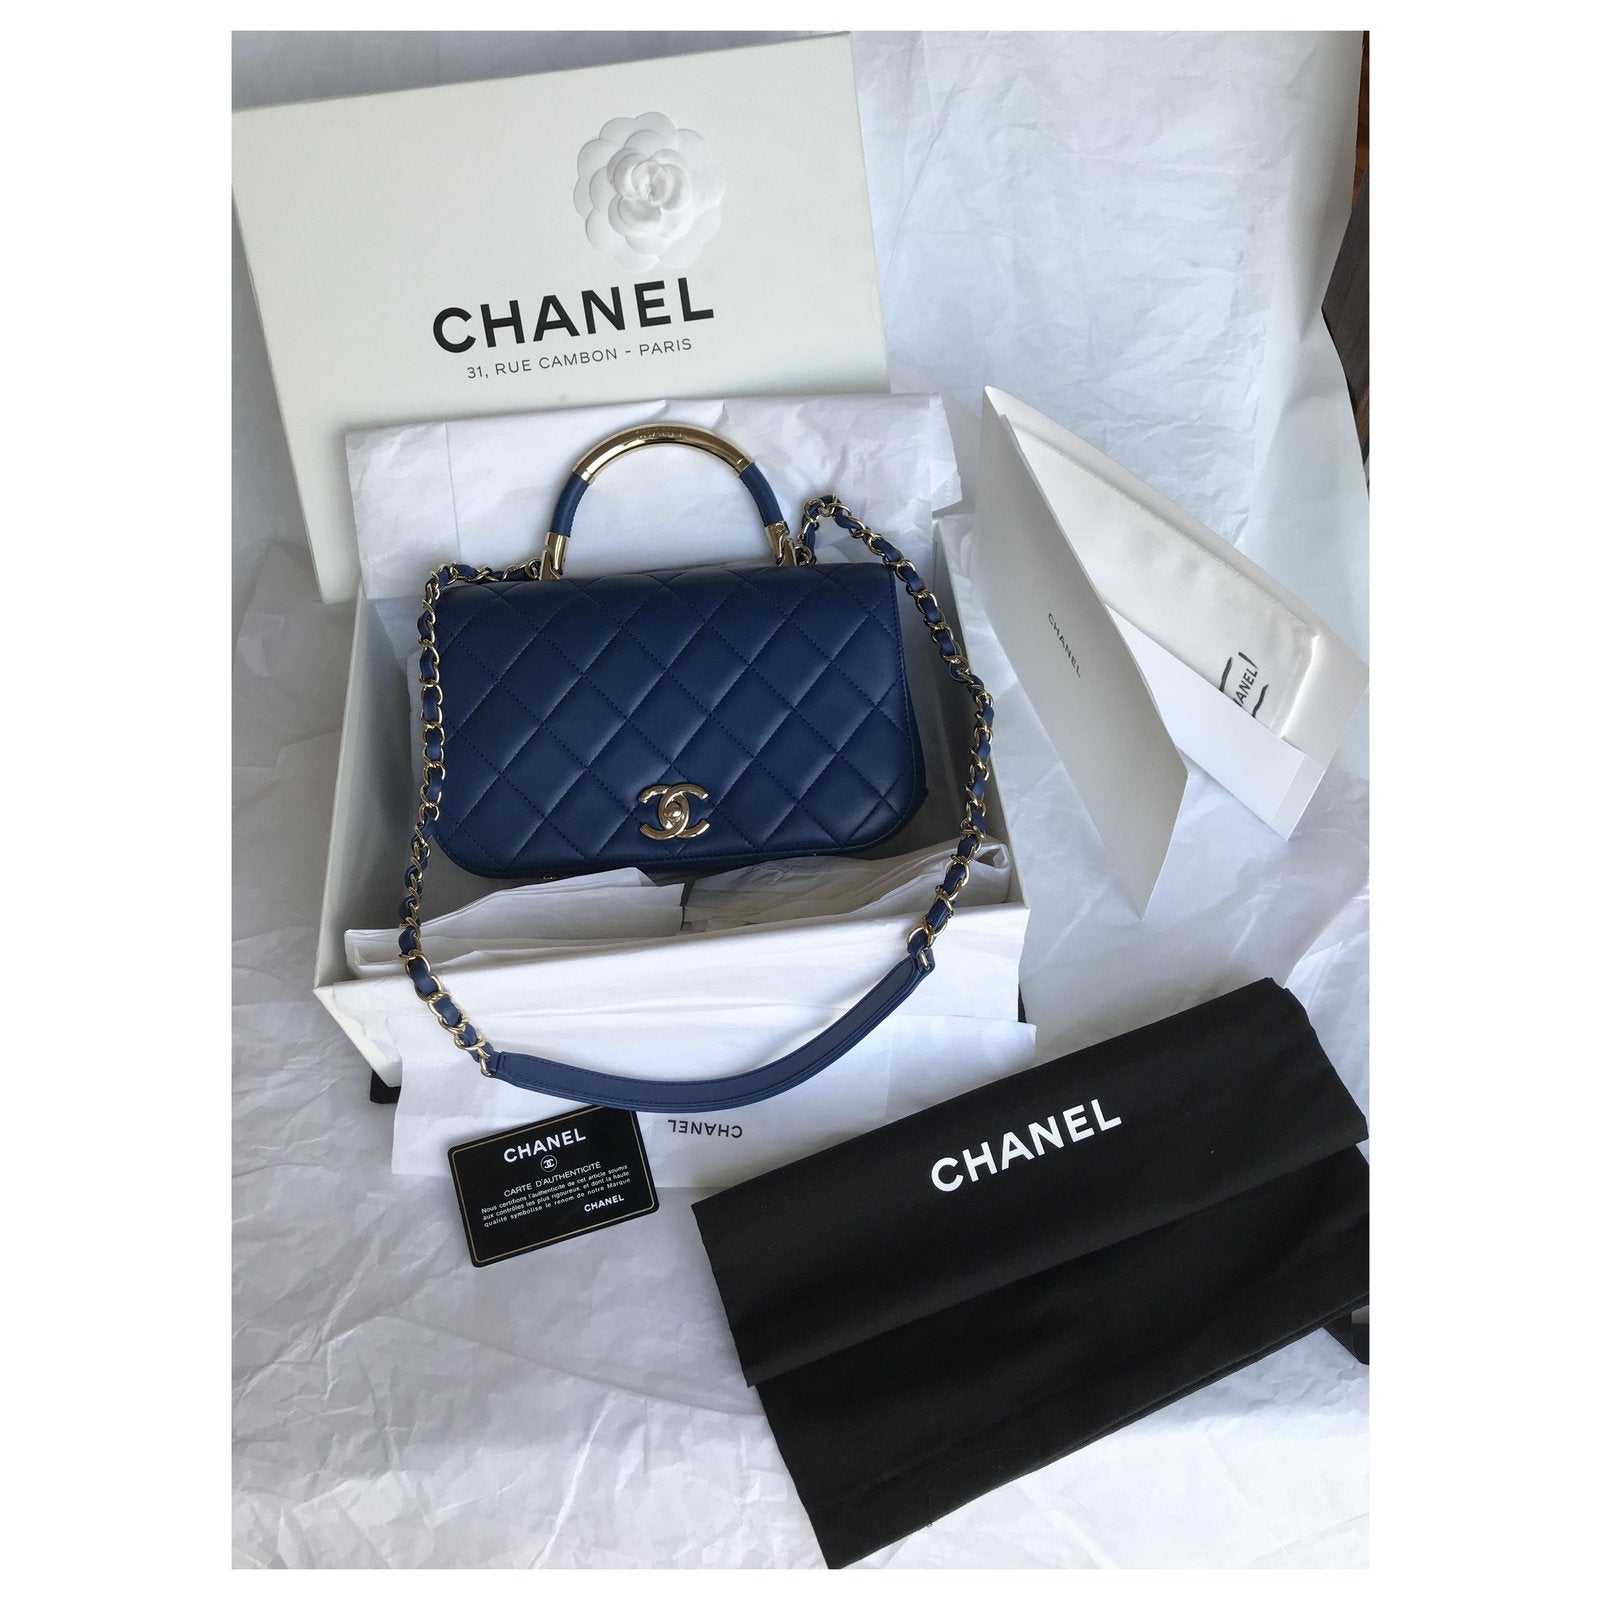 Chanel Medium Flap Bag With Top Handle Blue